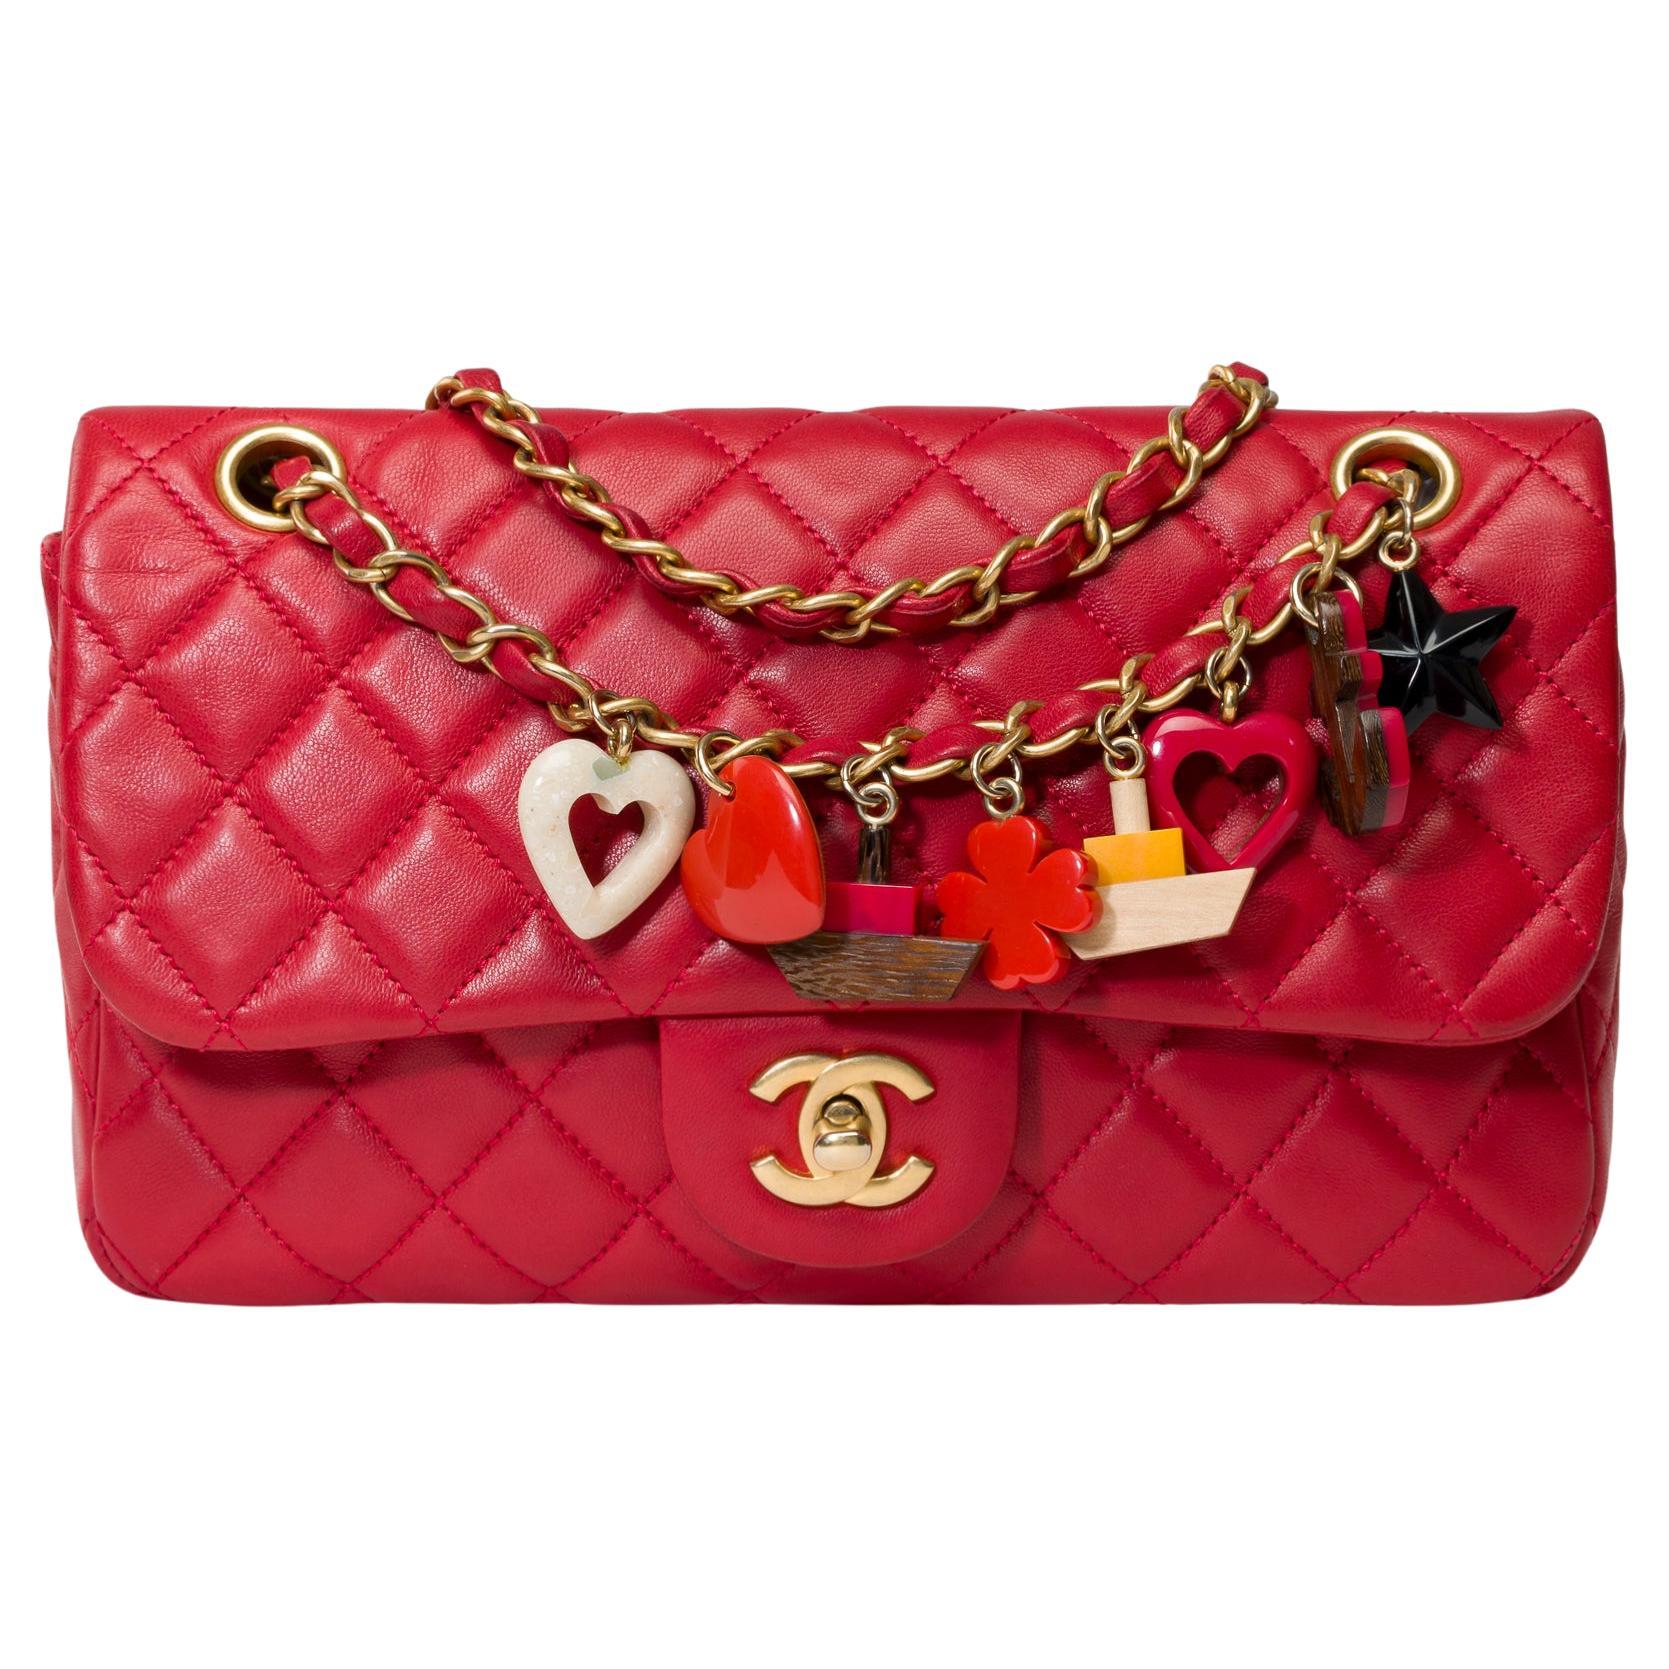 Chanel "Charms" Limited edition shoulder flap bag in red quilted lambskin, MGHW 